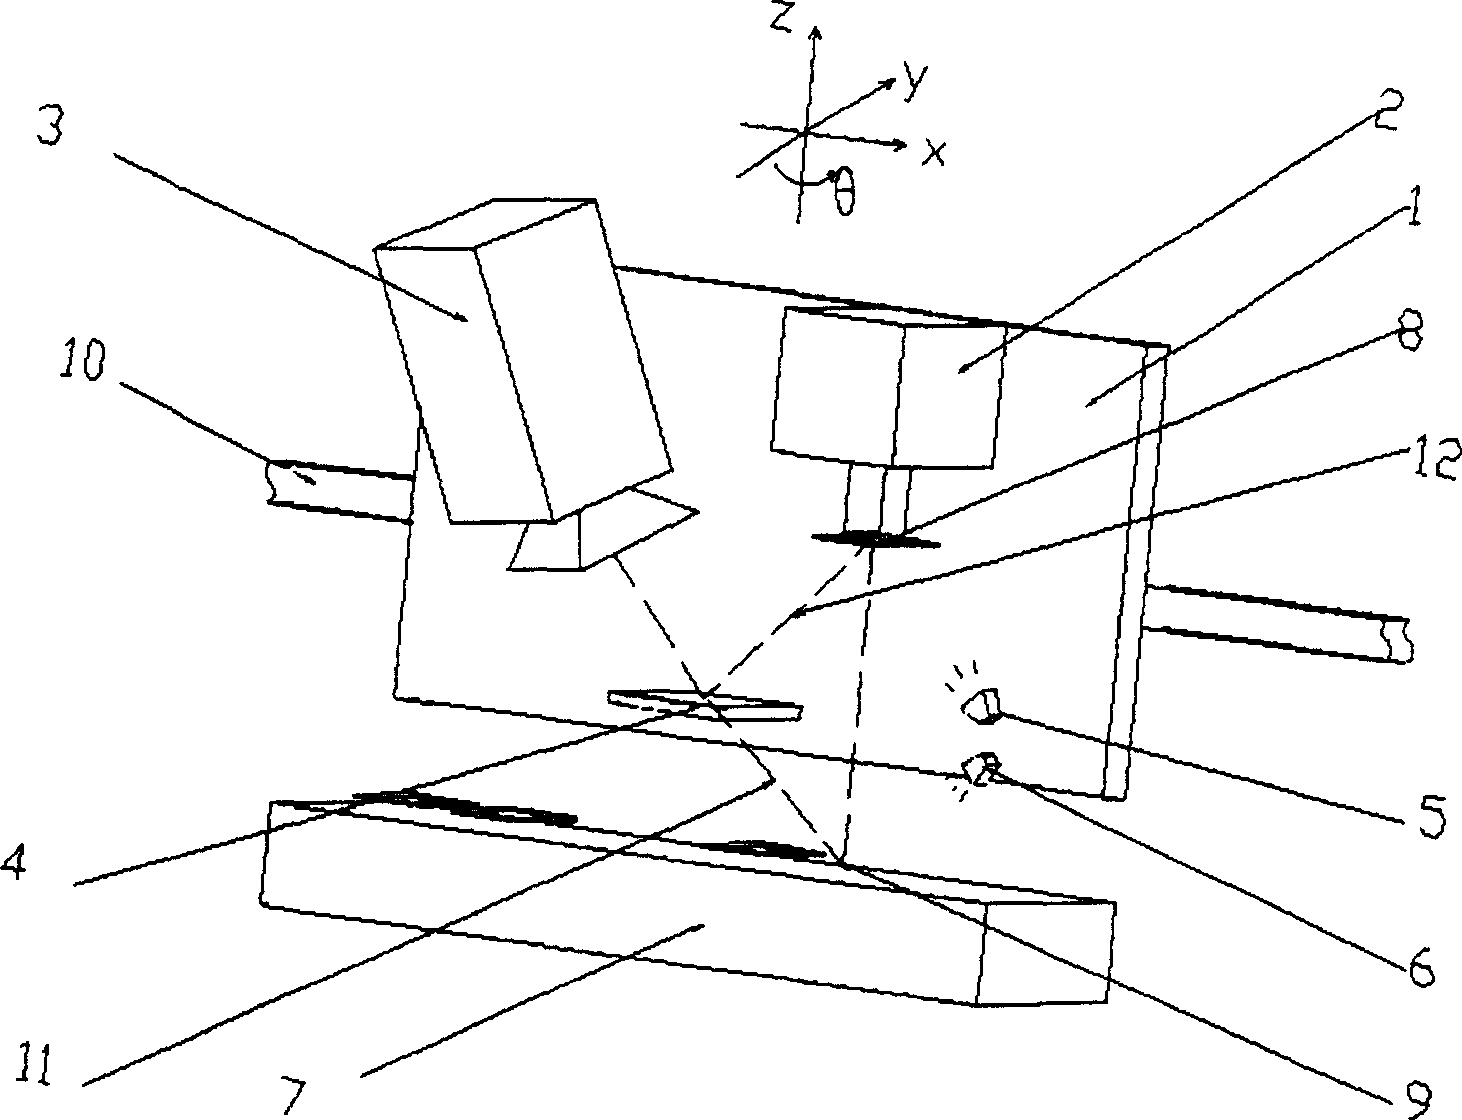 Vision contraposition device for mobile component